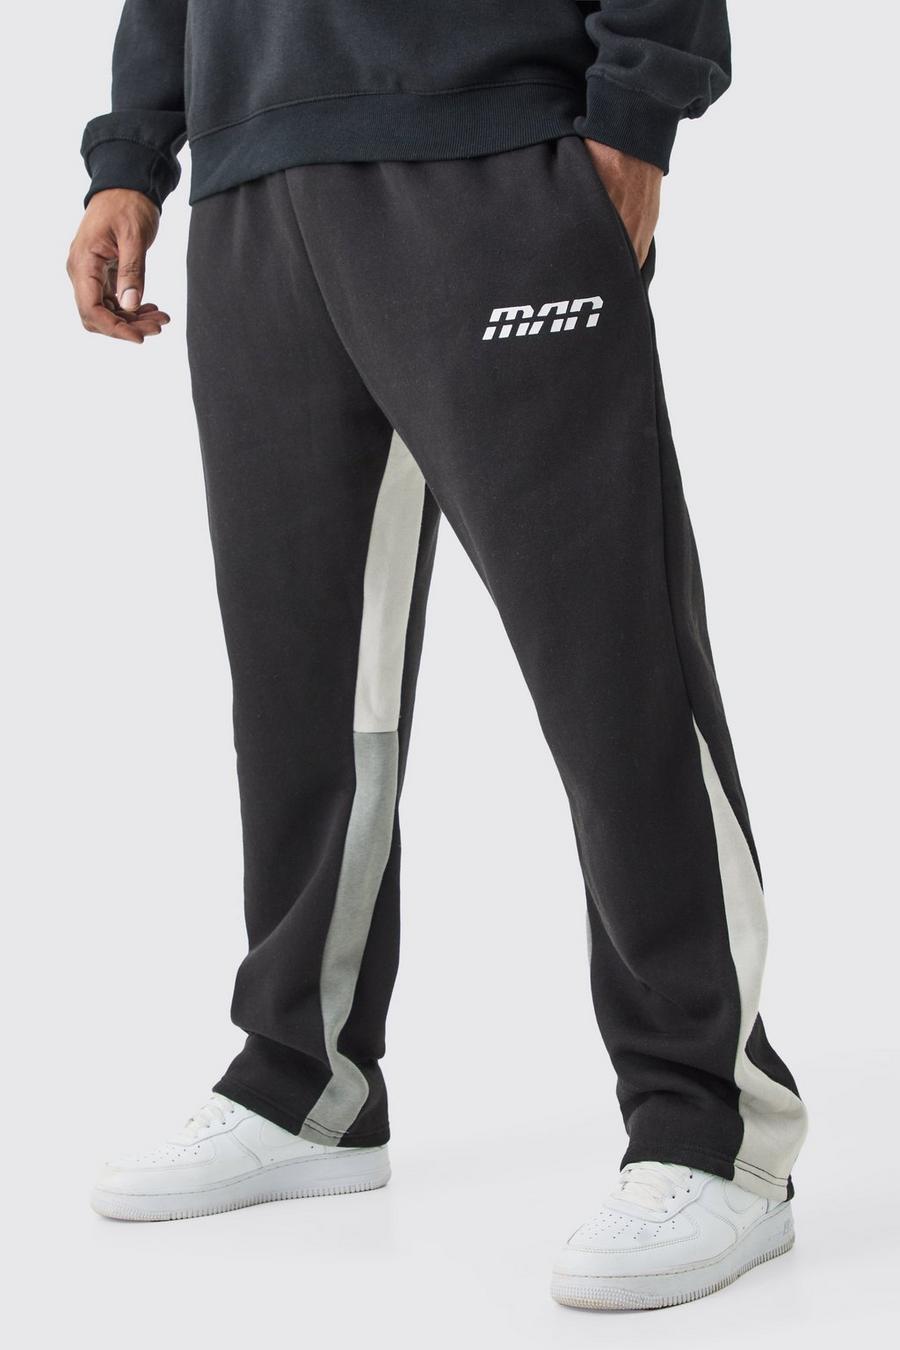 Sweatpants for Men Slim Fit Big and Tall Jogger Mens Waterproof Insulated  Stretch Comfy Fashion Plus Size Compression Pants : : Fashion